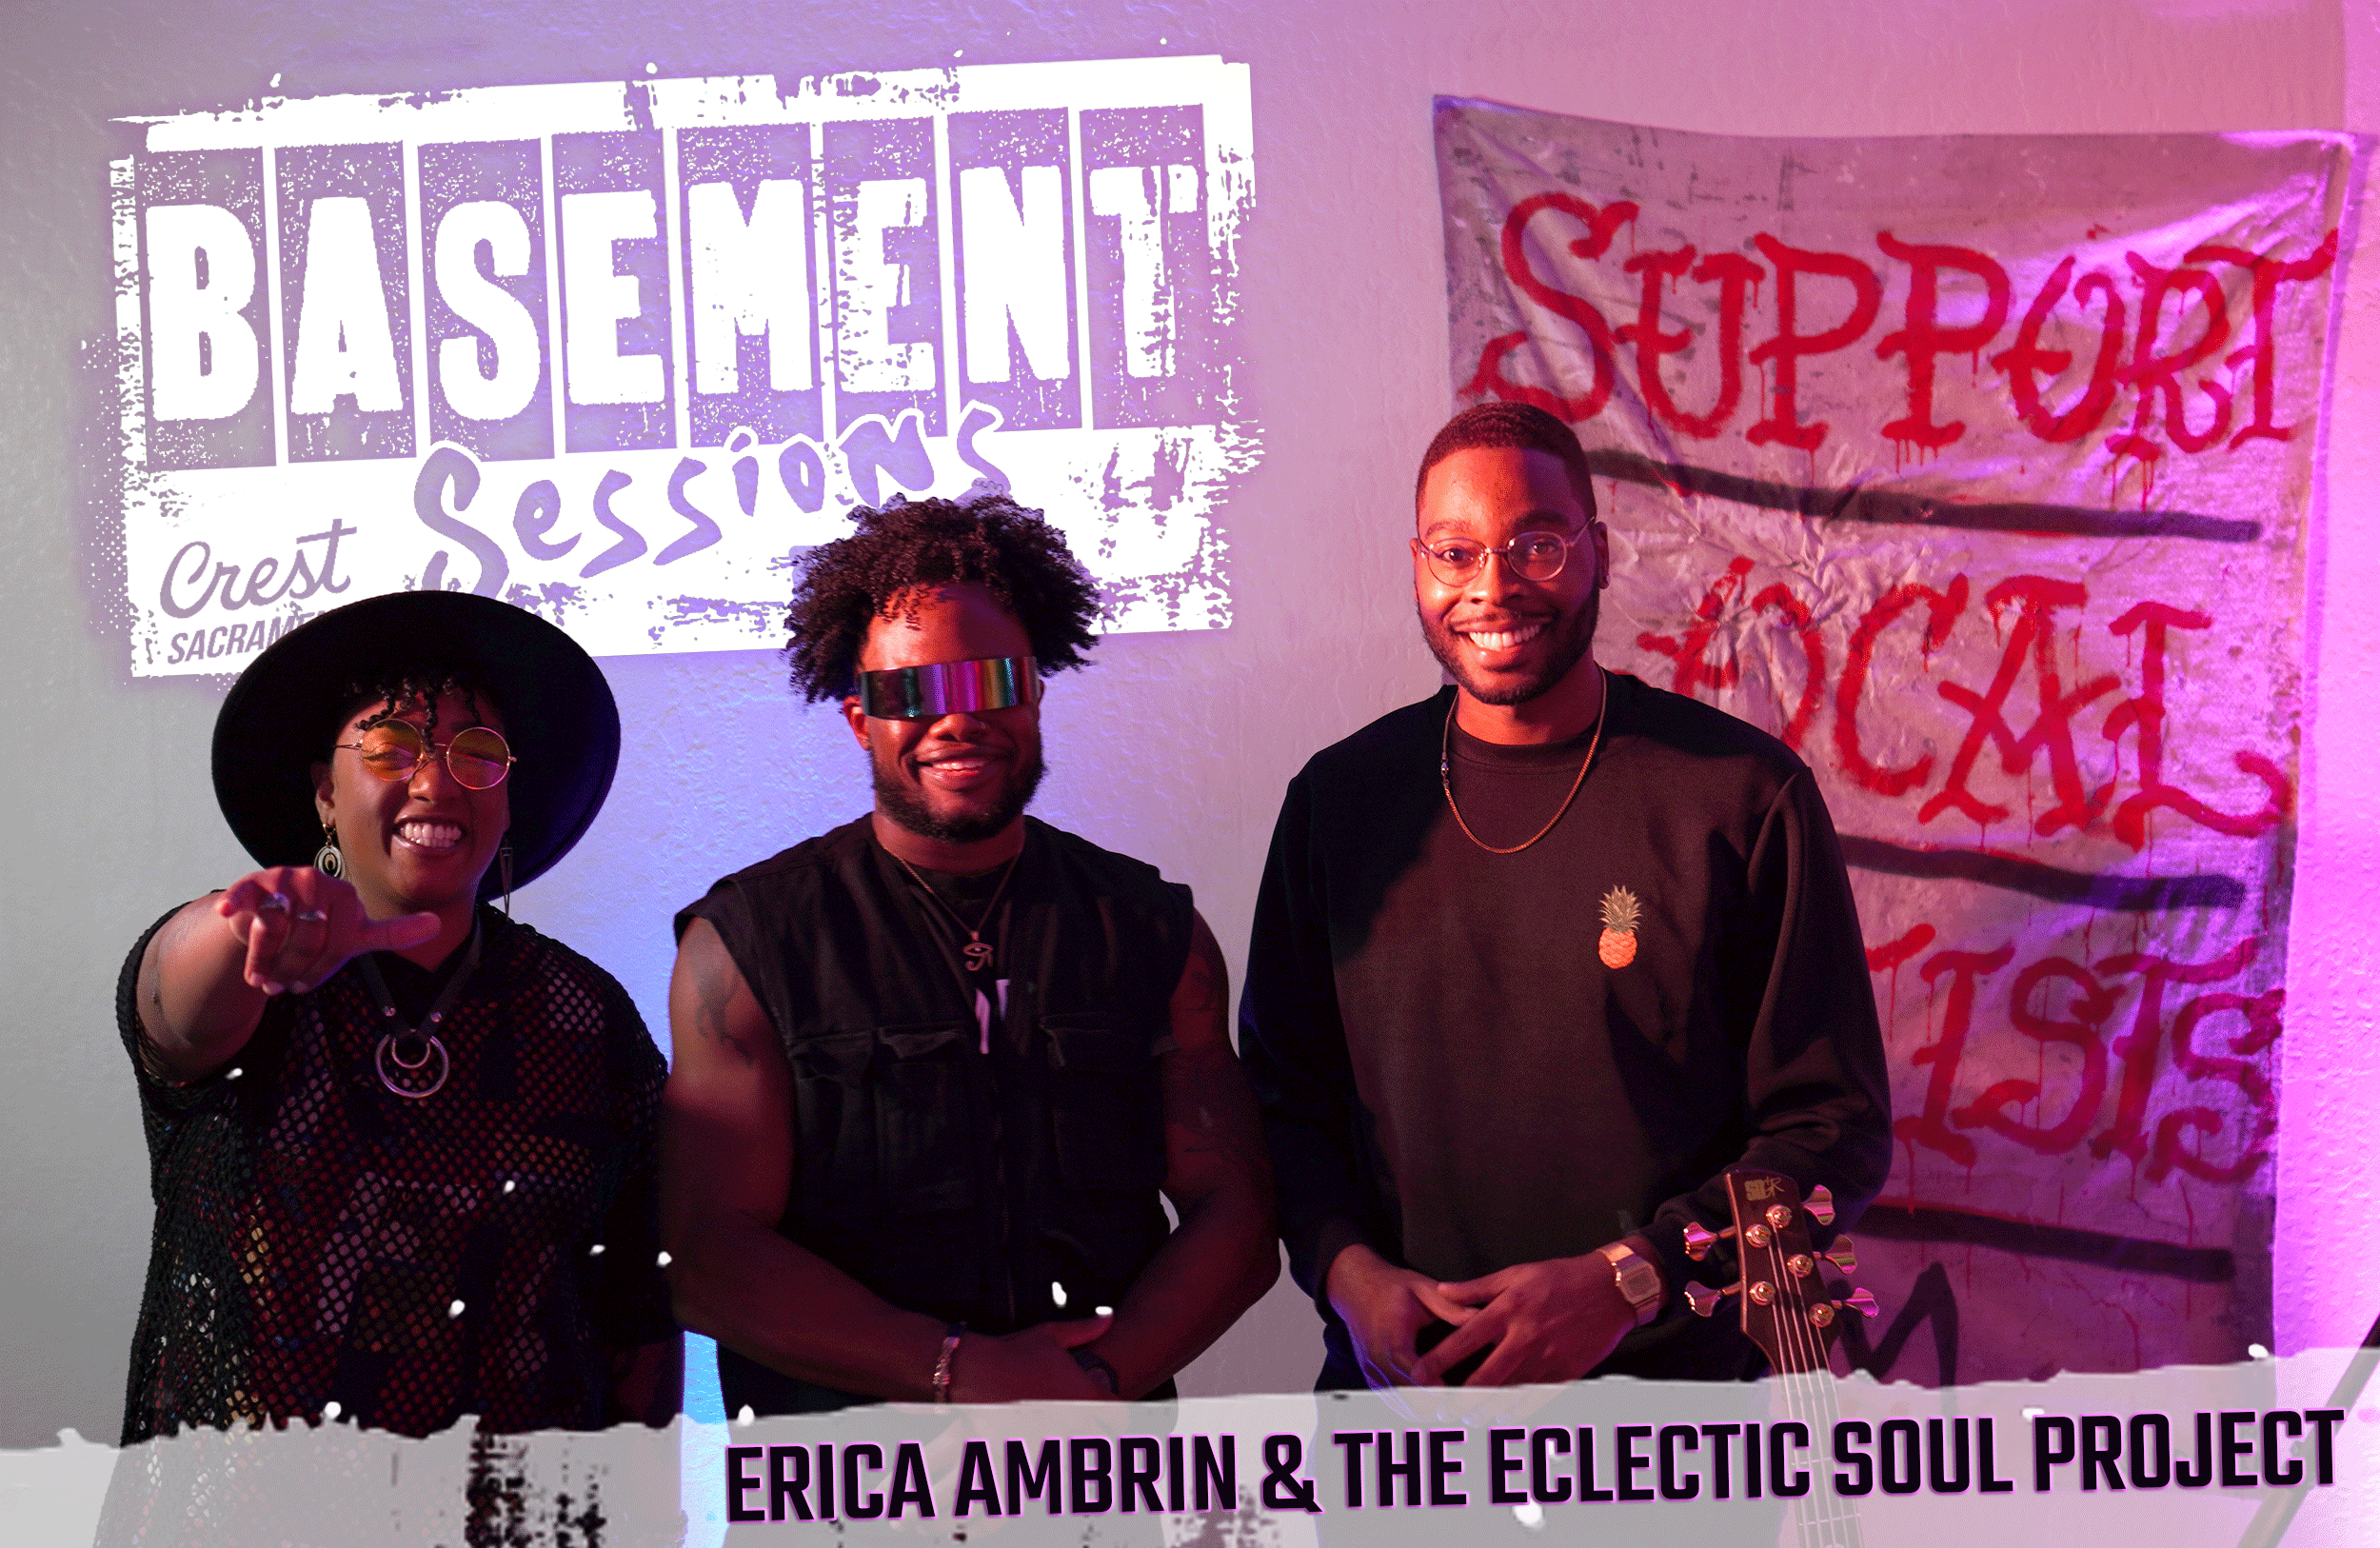 Erica Ambrin & The Eclectic Soul Project